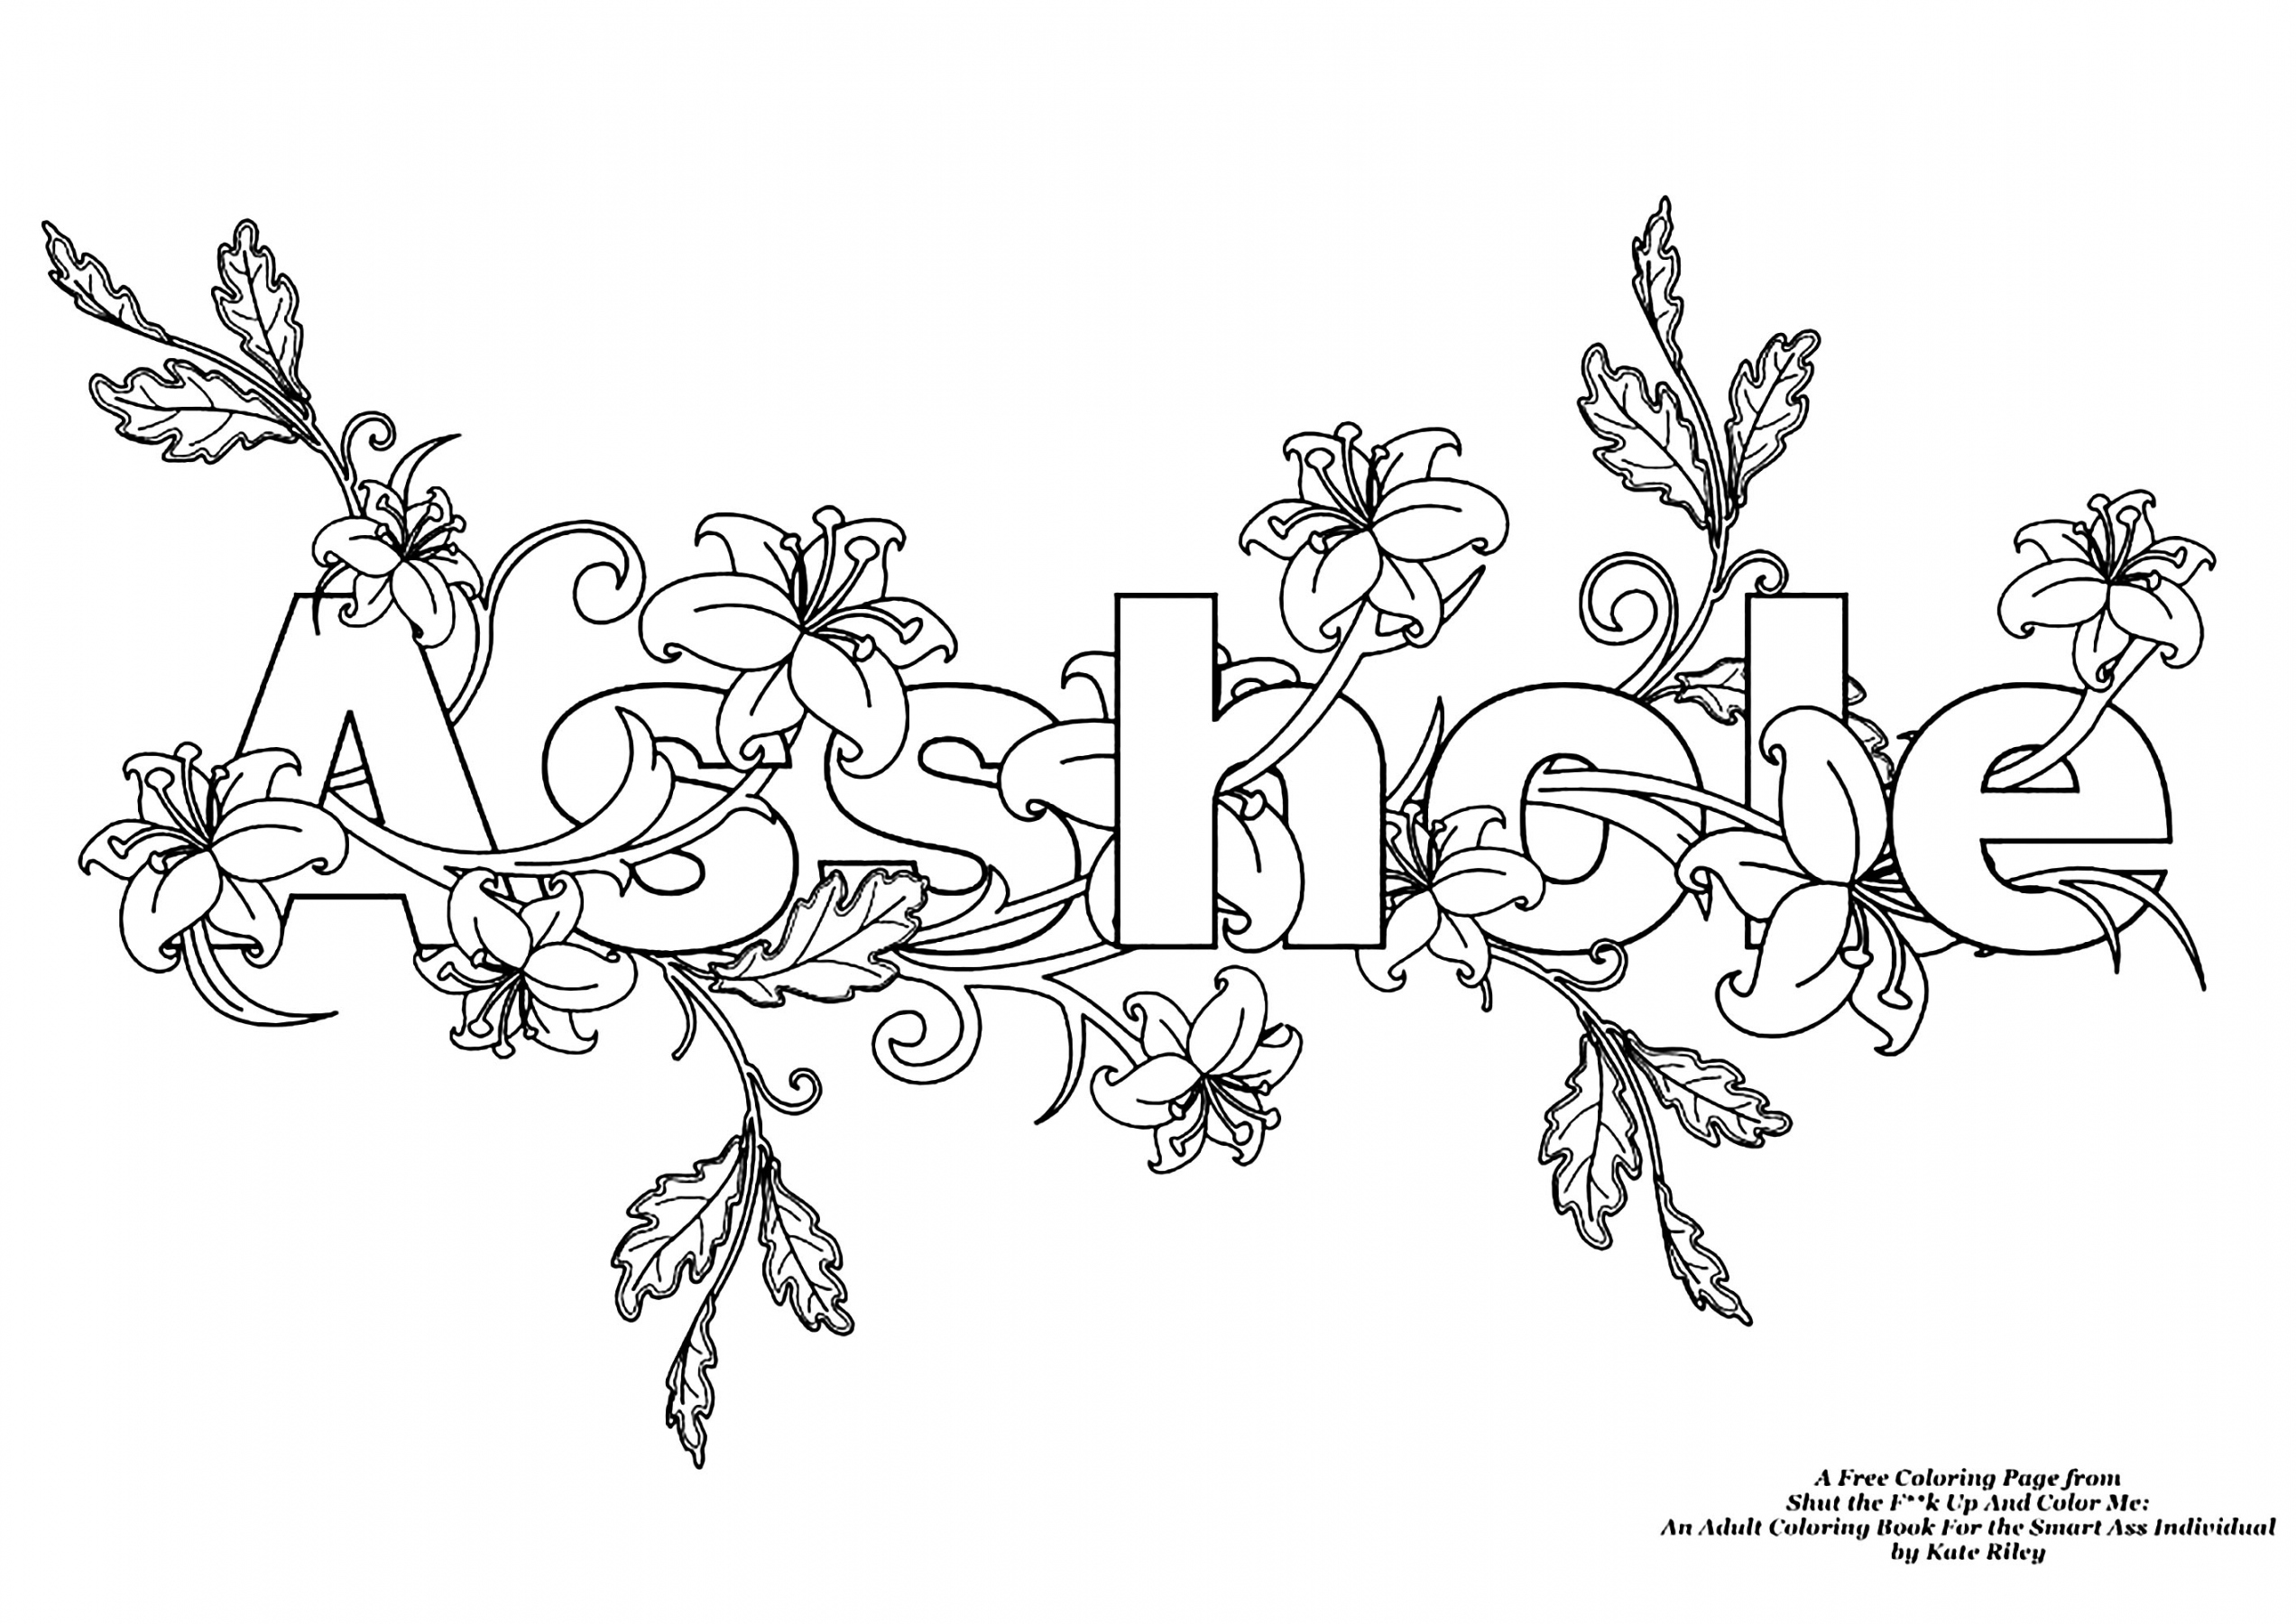 Free Printable Inappropriate Coloring Pages For Adults - Printable - Asshole (Swear word coloring page) - Swear word Adult Coloring Pages